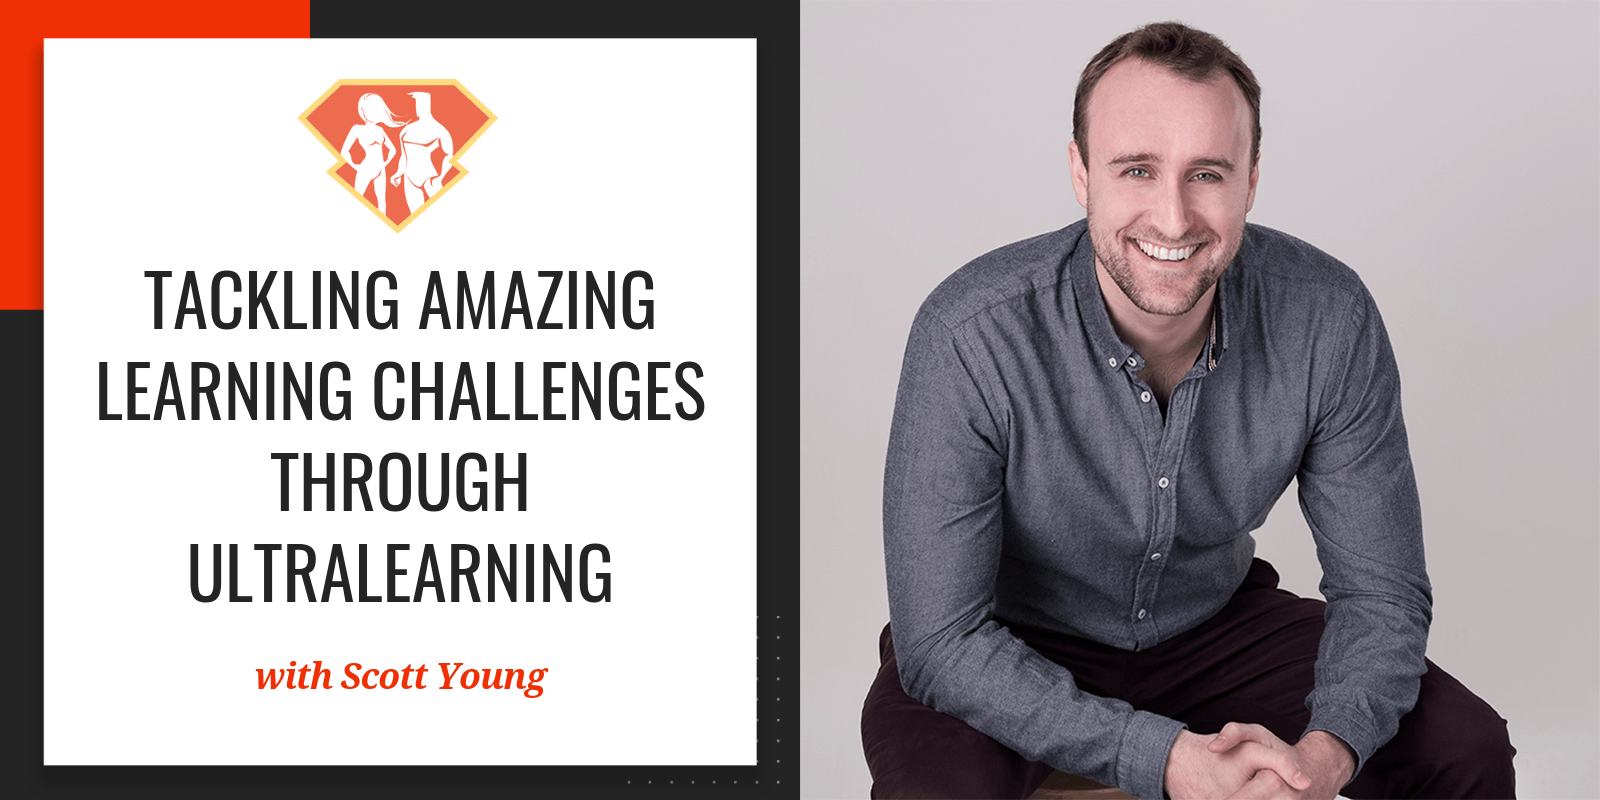 In this episode with Scott Young, we learn all about how he tackles some amazing (and hard!) learning challenges, as well as how we can do the same.